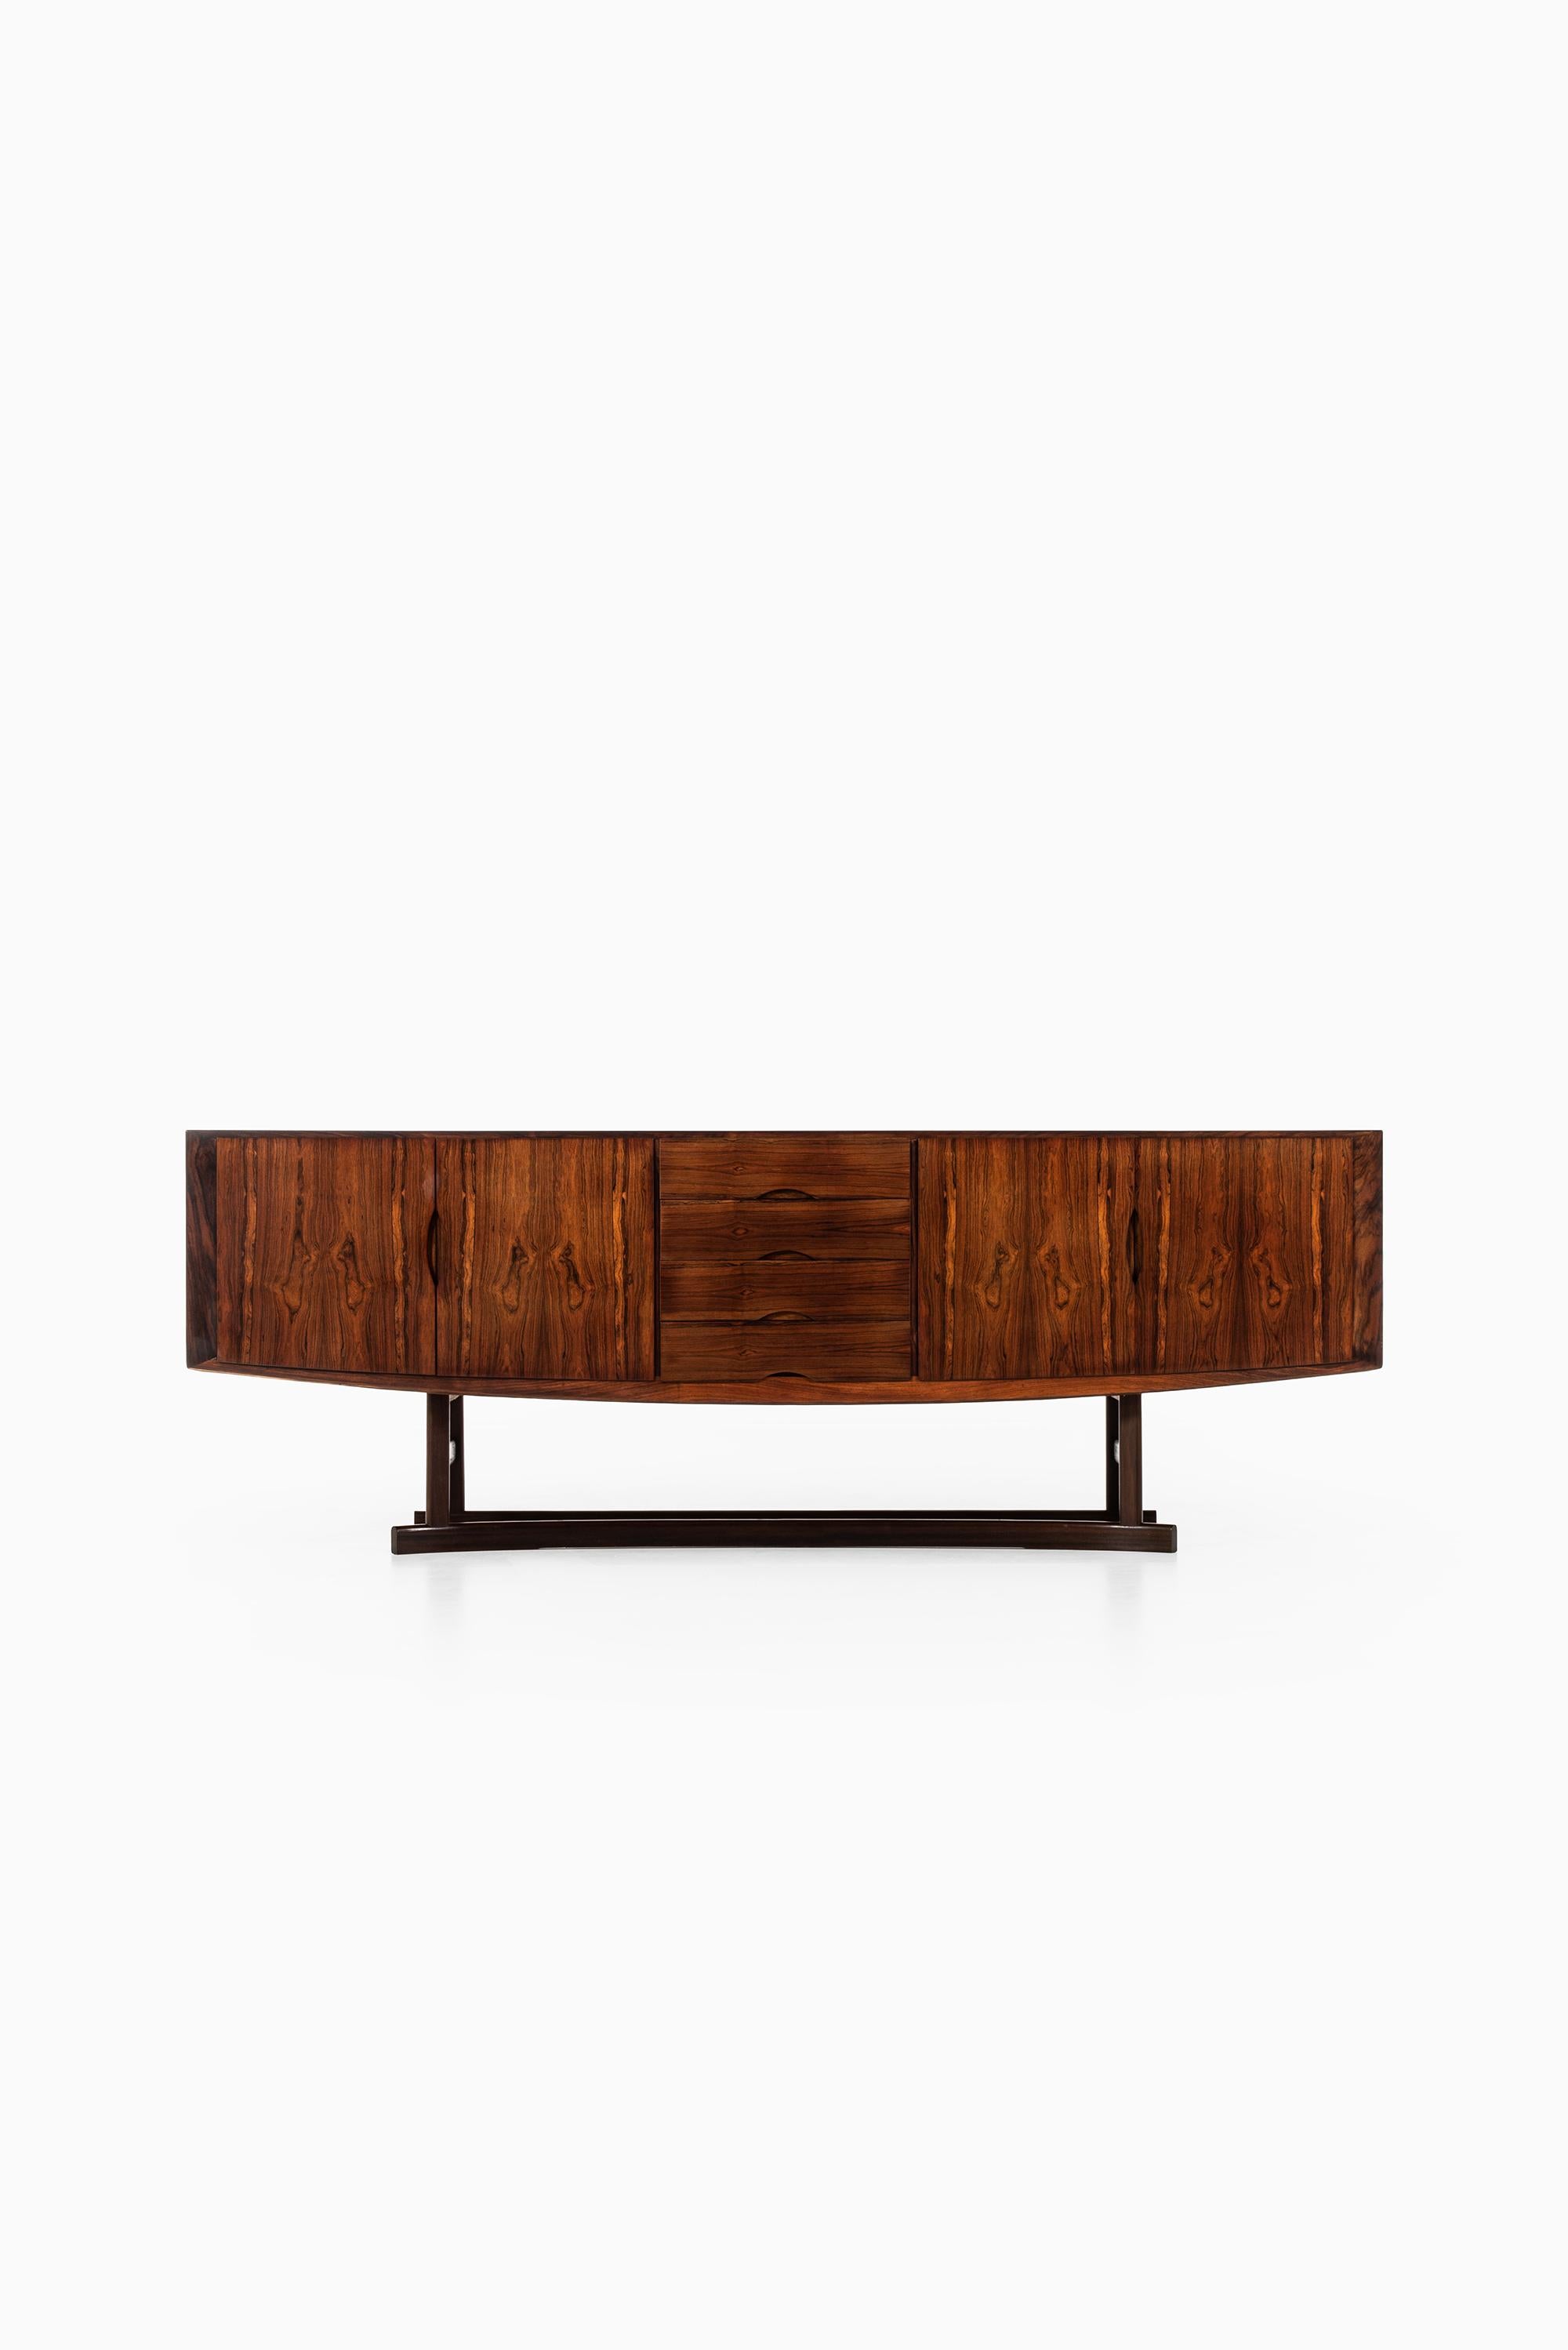 Very rare sideboard model HB20 designed by Johannes Andersen. Produced by Hans Bech in Denmark.